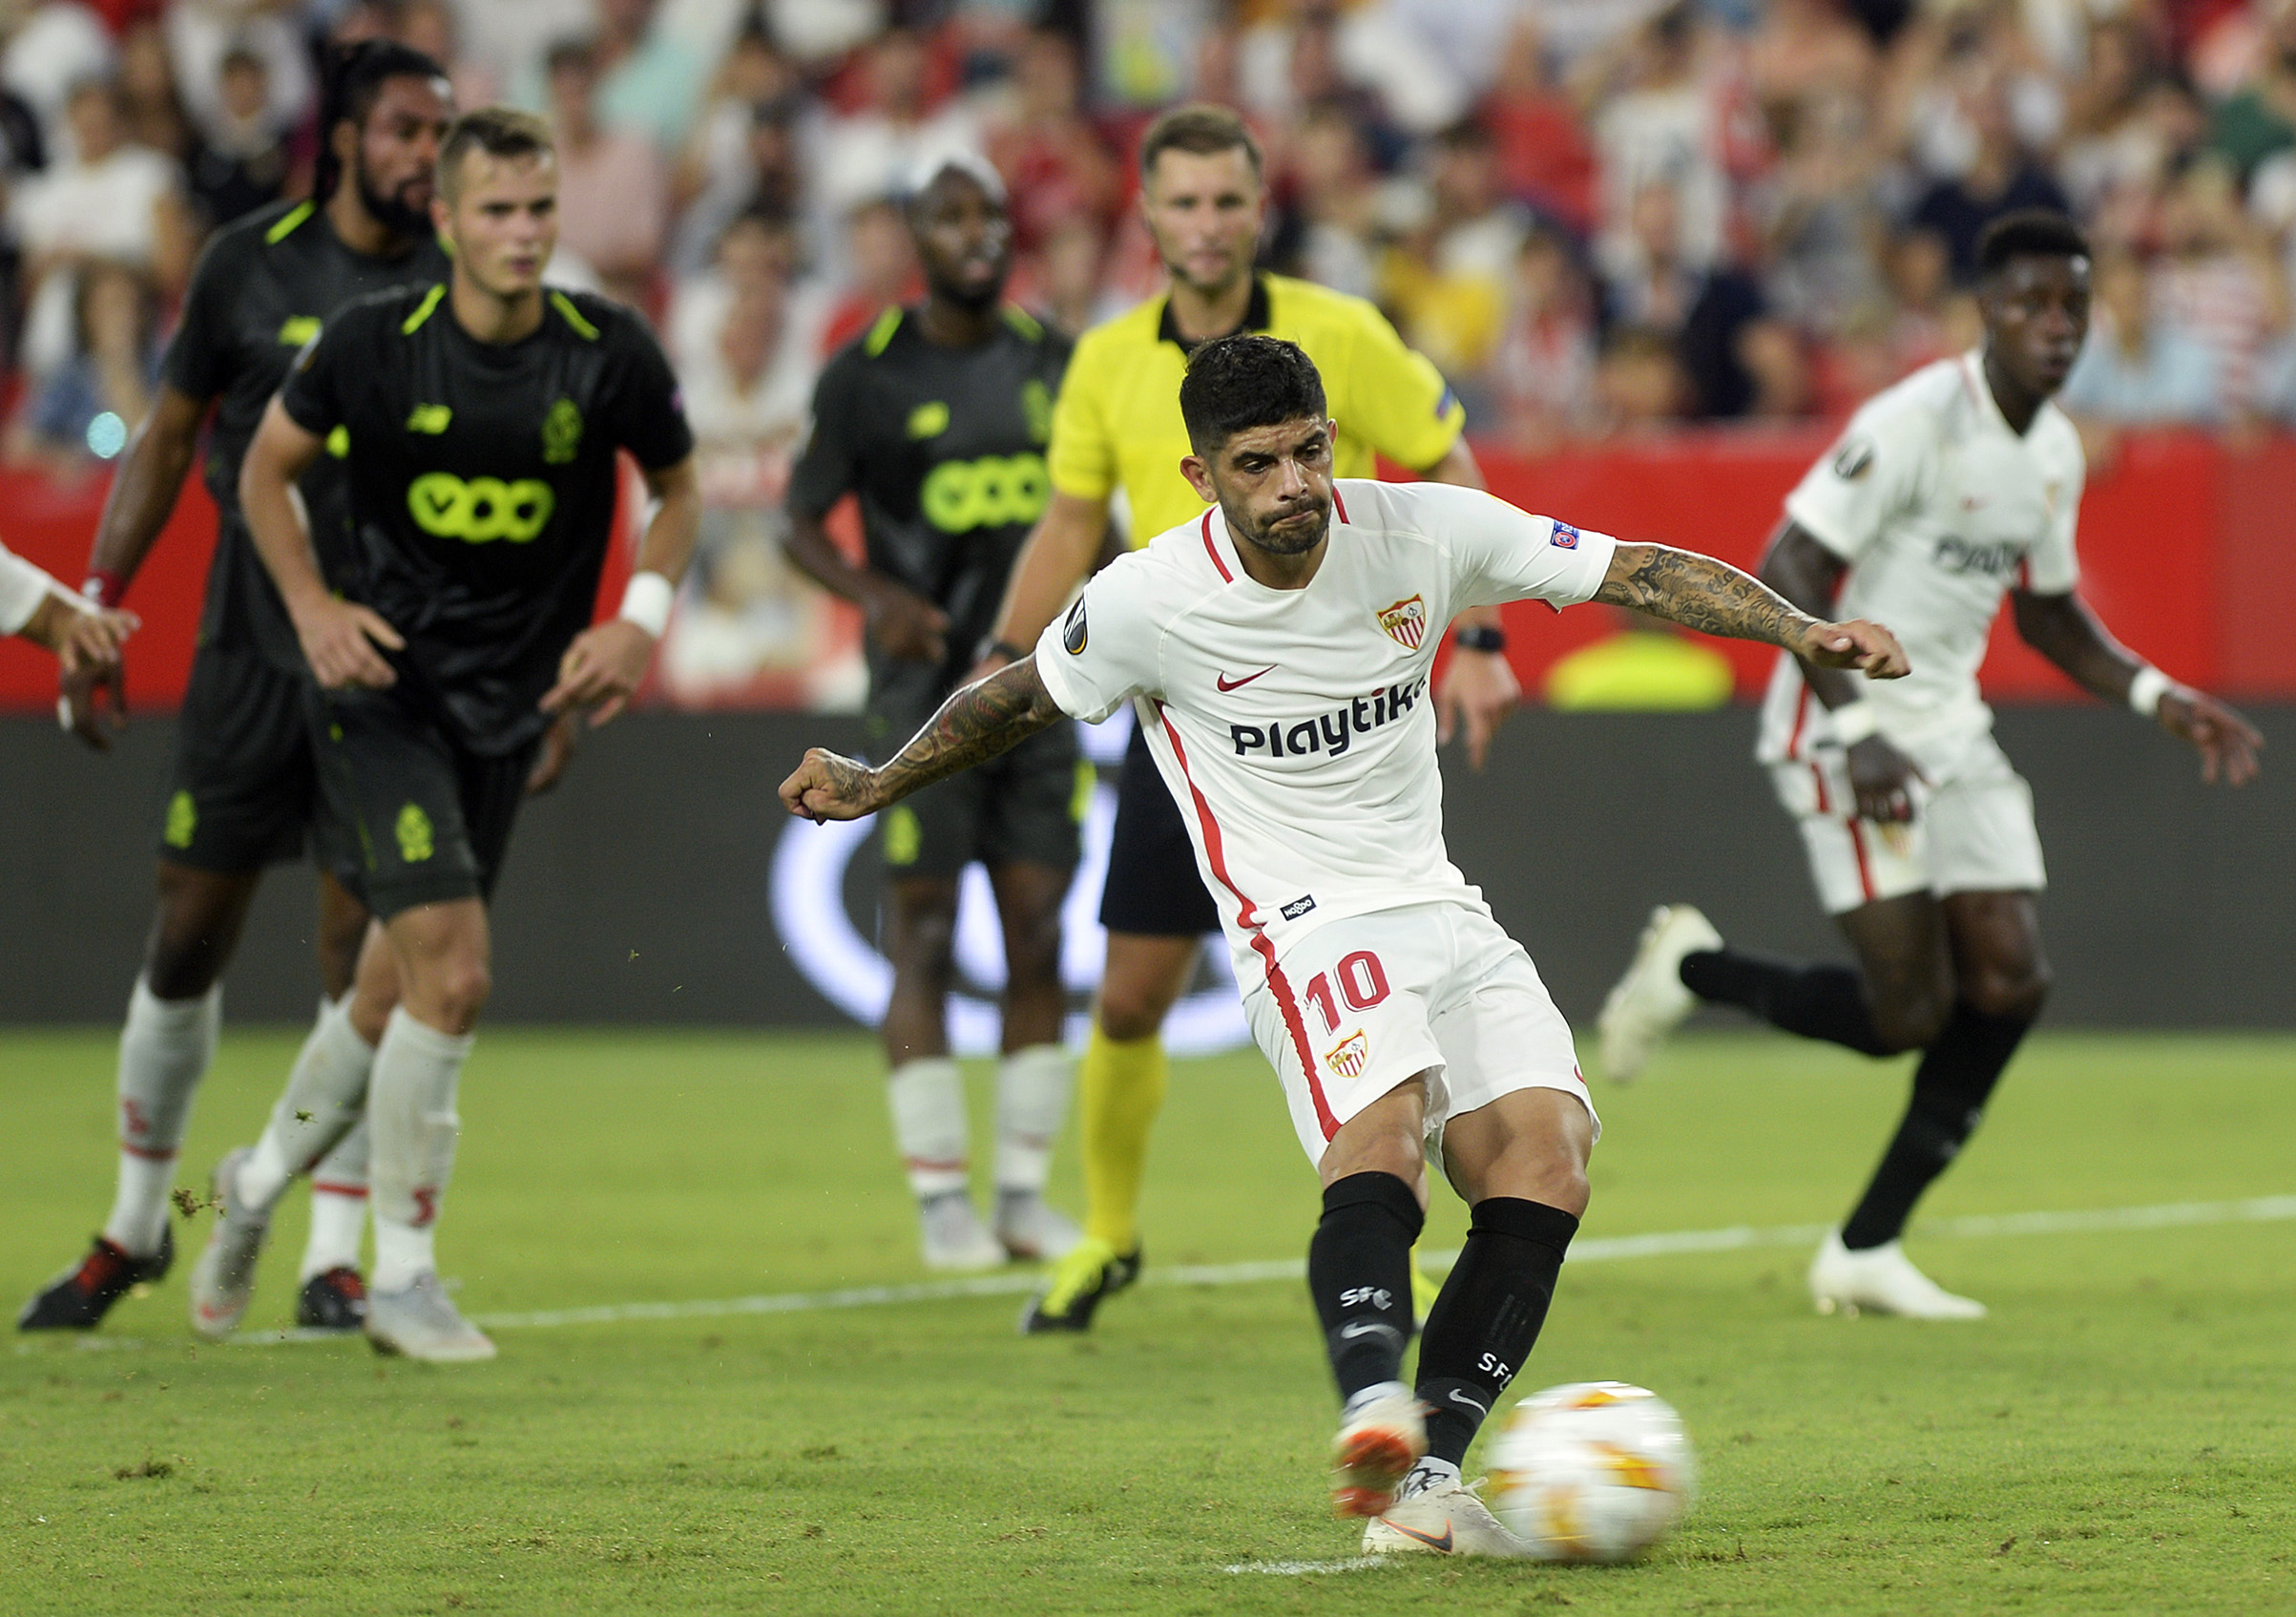 Sevilla's Argentinian midfielder Ever Banega shoots a penalty kick to score a goal during the UEFA Europa League group J football match between Sevilla FC and Standard Liege at the Ramon Sanchez Pizjuan stadium in Seville on September 20, 2018. (Photo by CRISTINA QUICLER / AFP)        (Photo credit should read CRISTINA QUICLER/AFP/Getty Images)